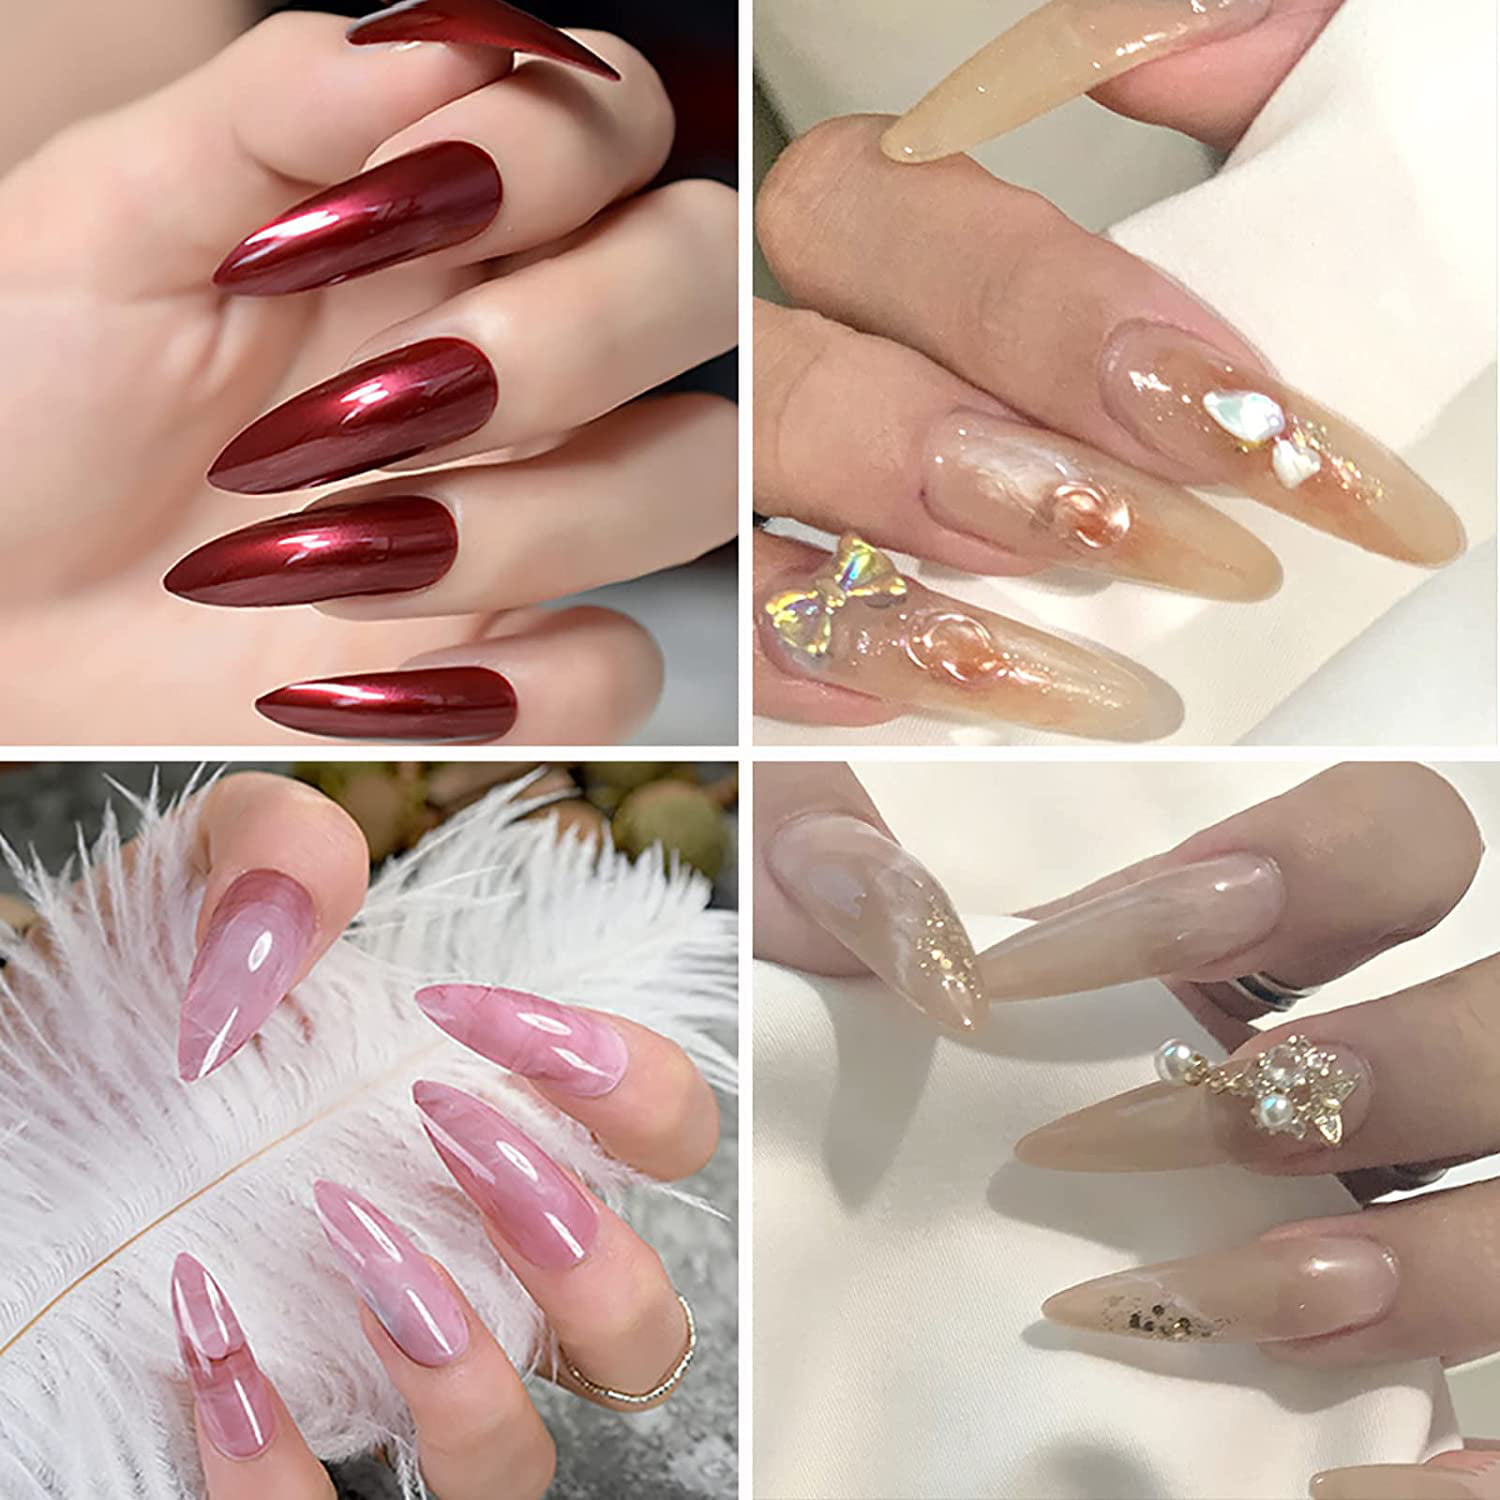 45 of the *Best* Almond Nail Ideas for Your Next Mani